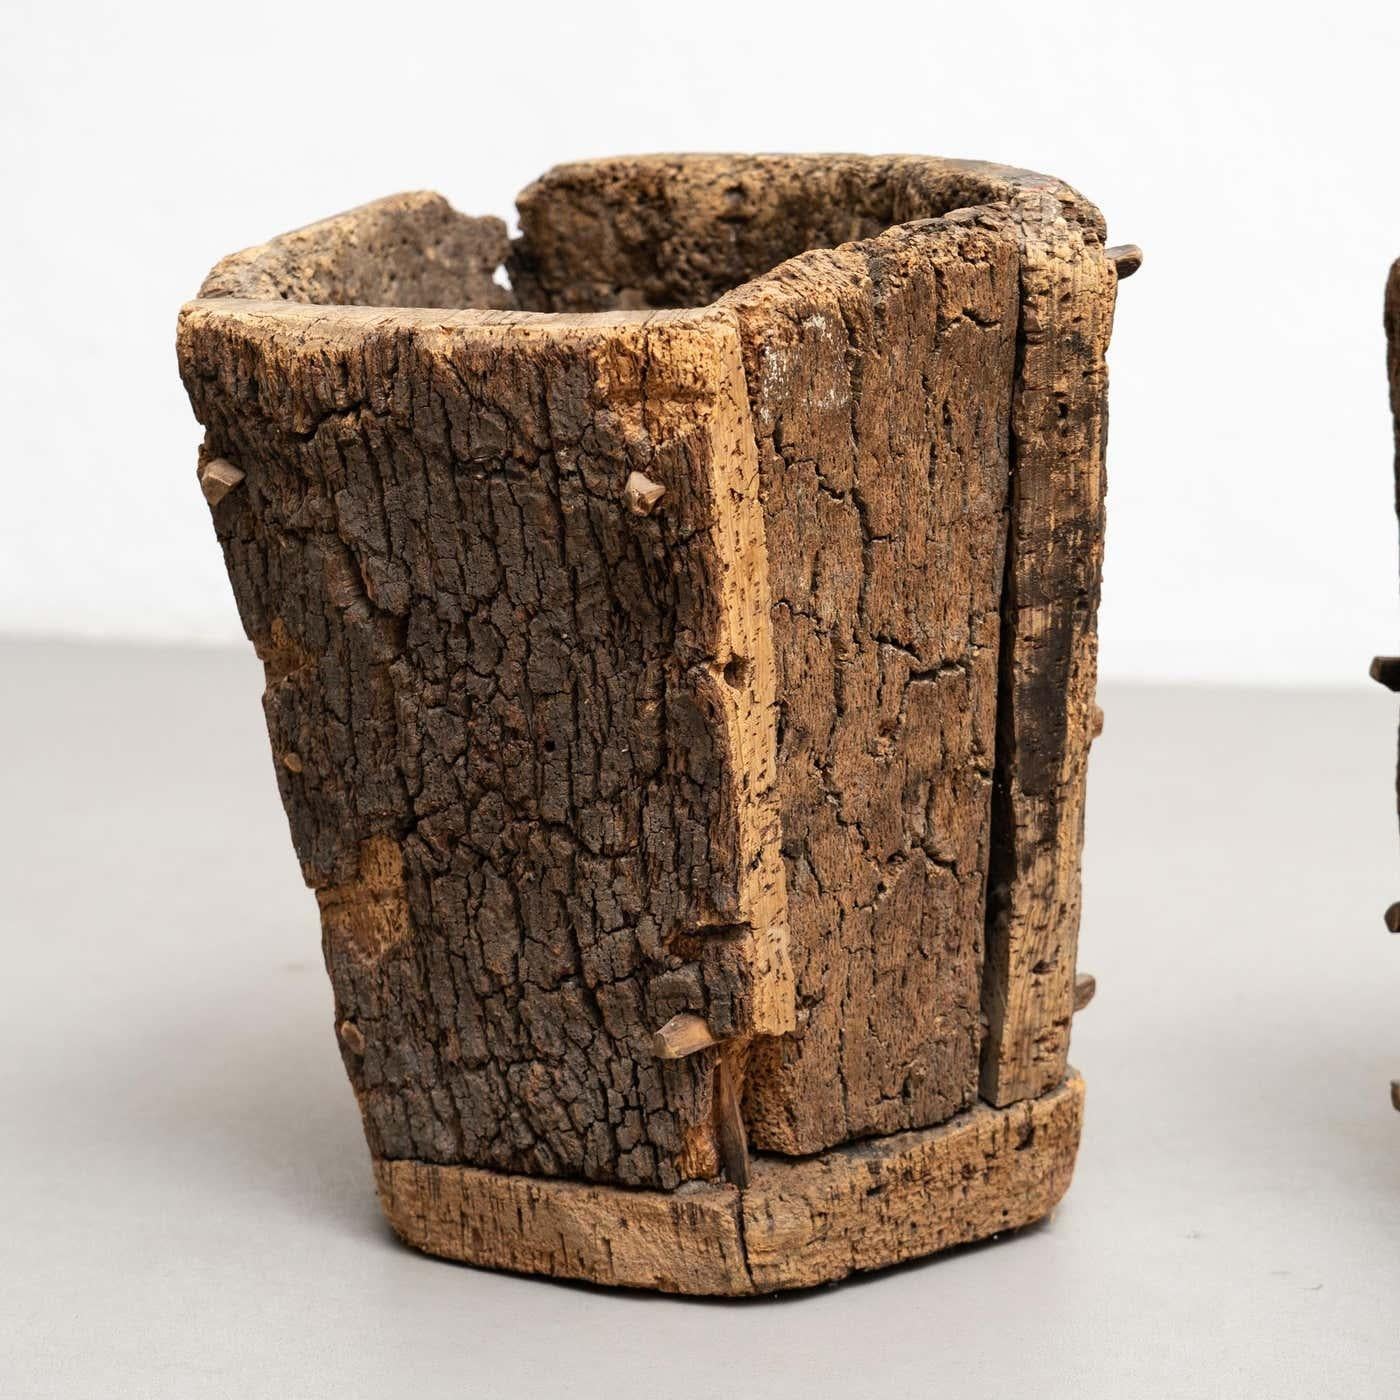 Brutalist Romance: Pair of Vintage Cork Trash Bins from the Early 20th Century For Sale 2